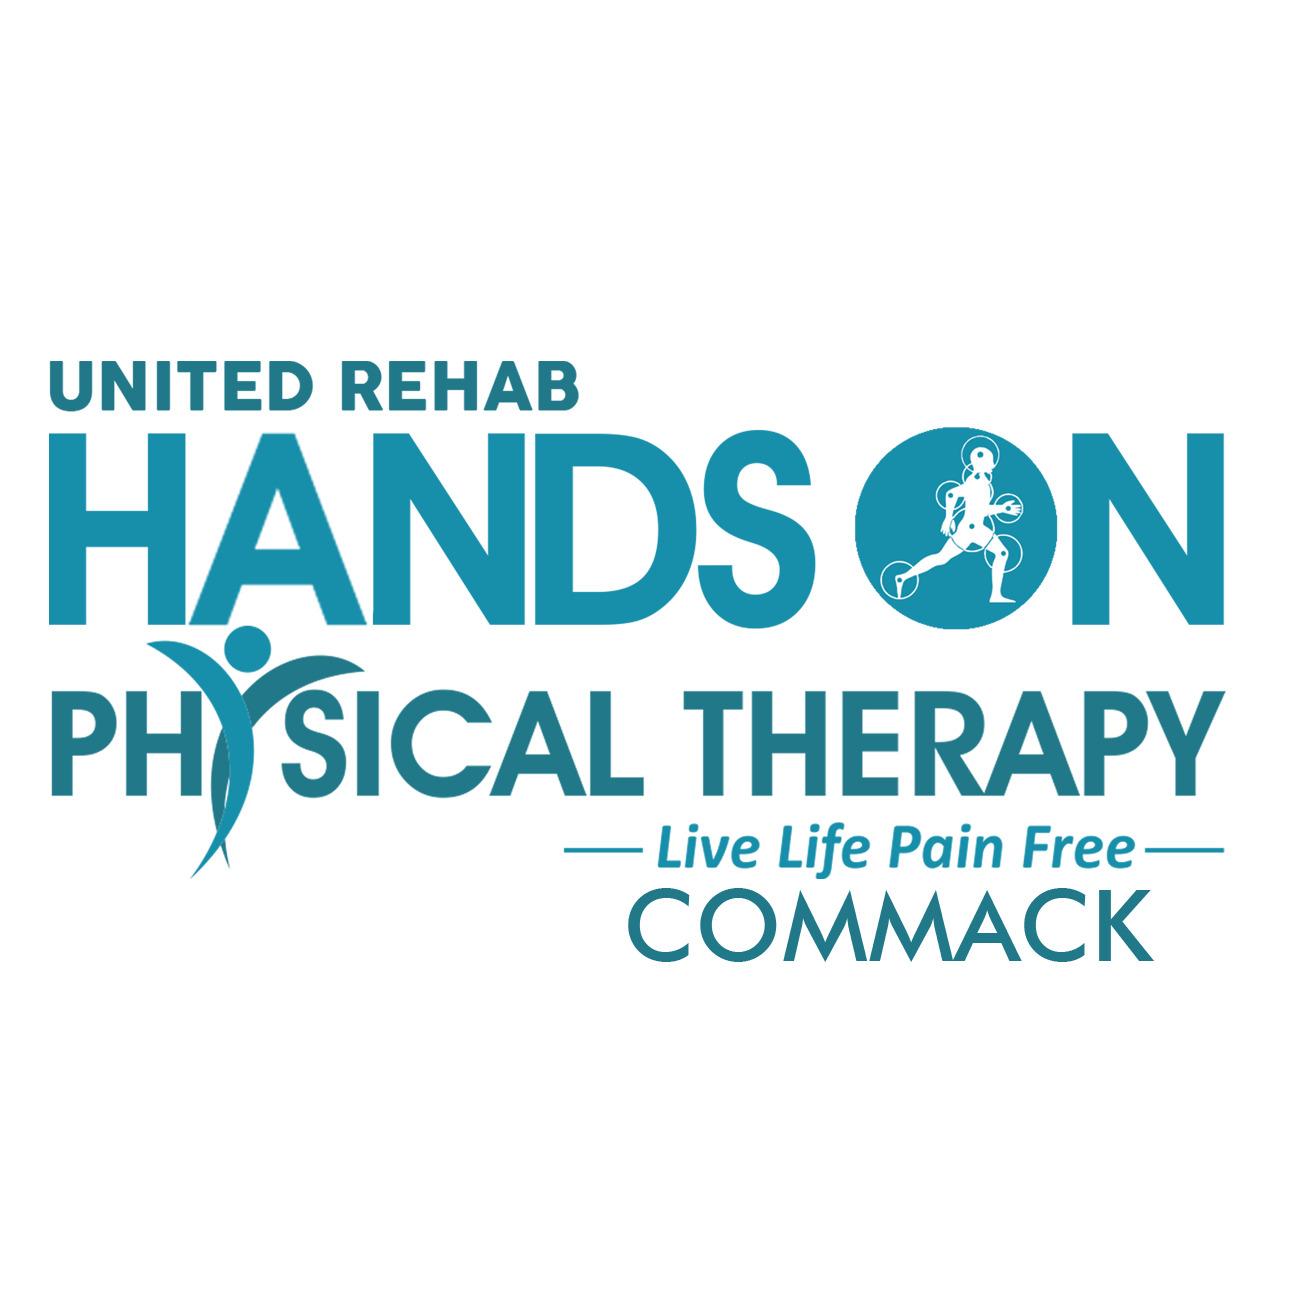 HANDS ON PHYSICAL THERAPY | COMMACK Logo